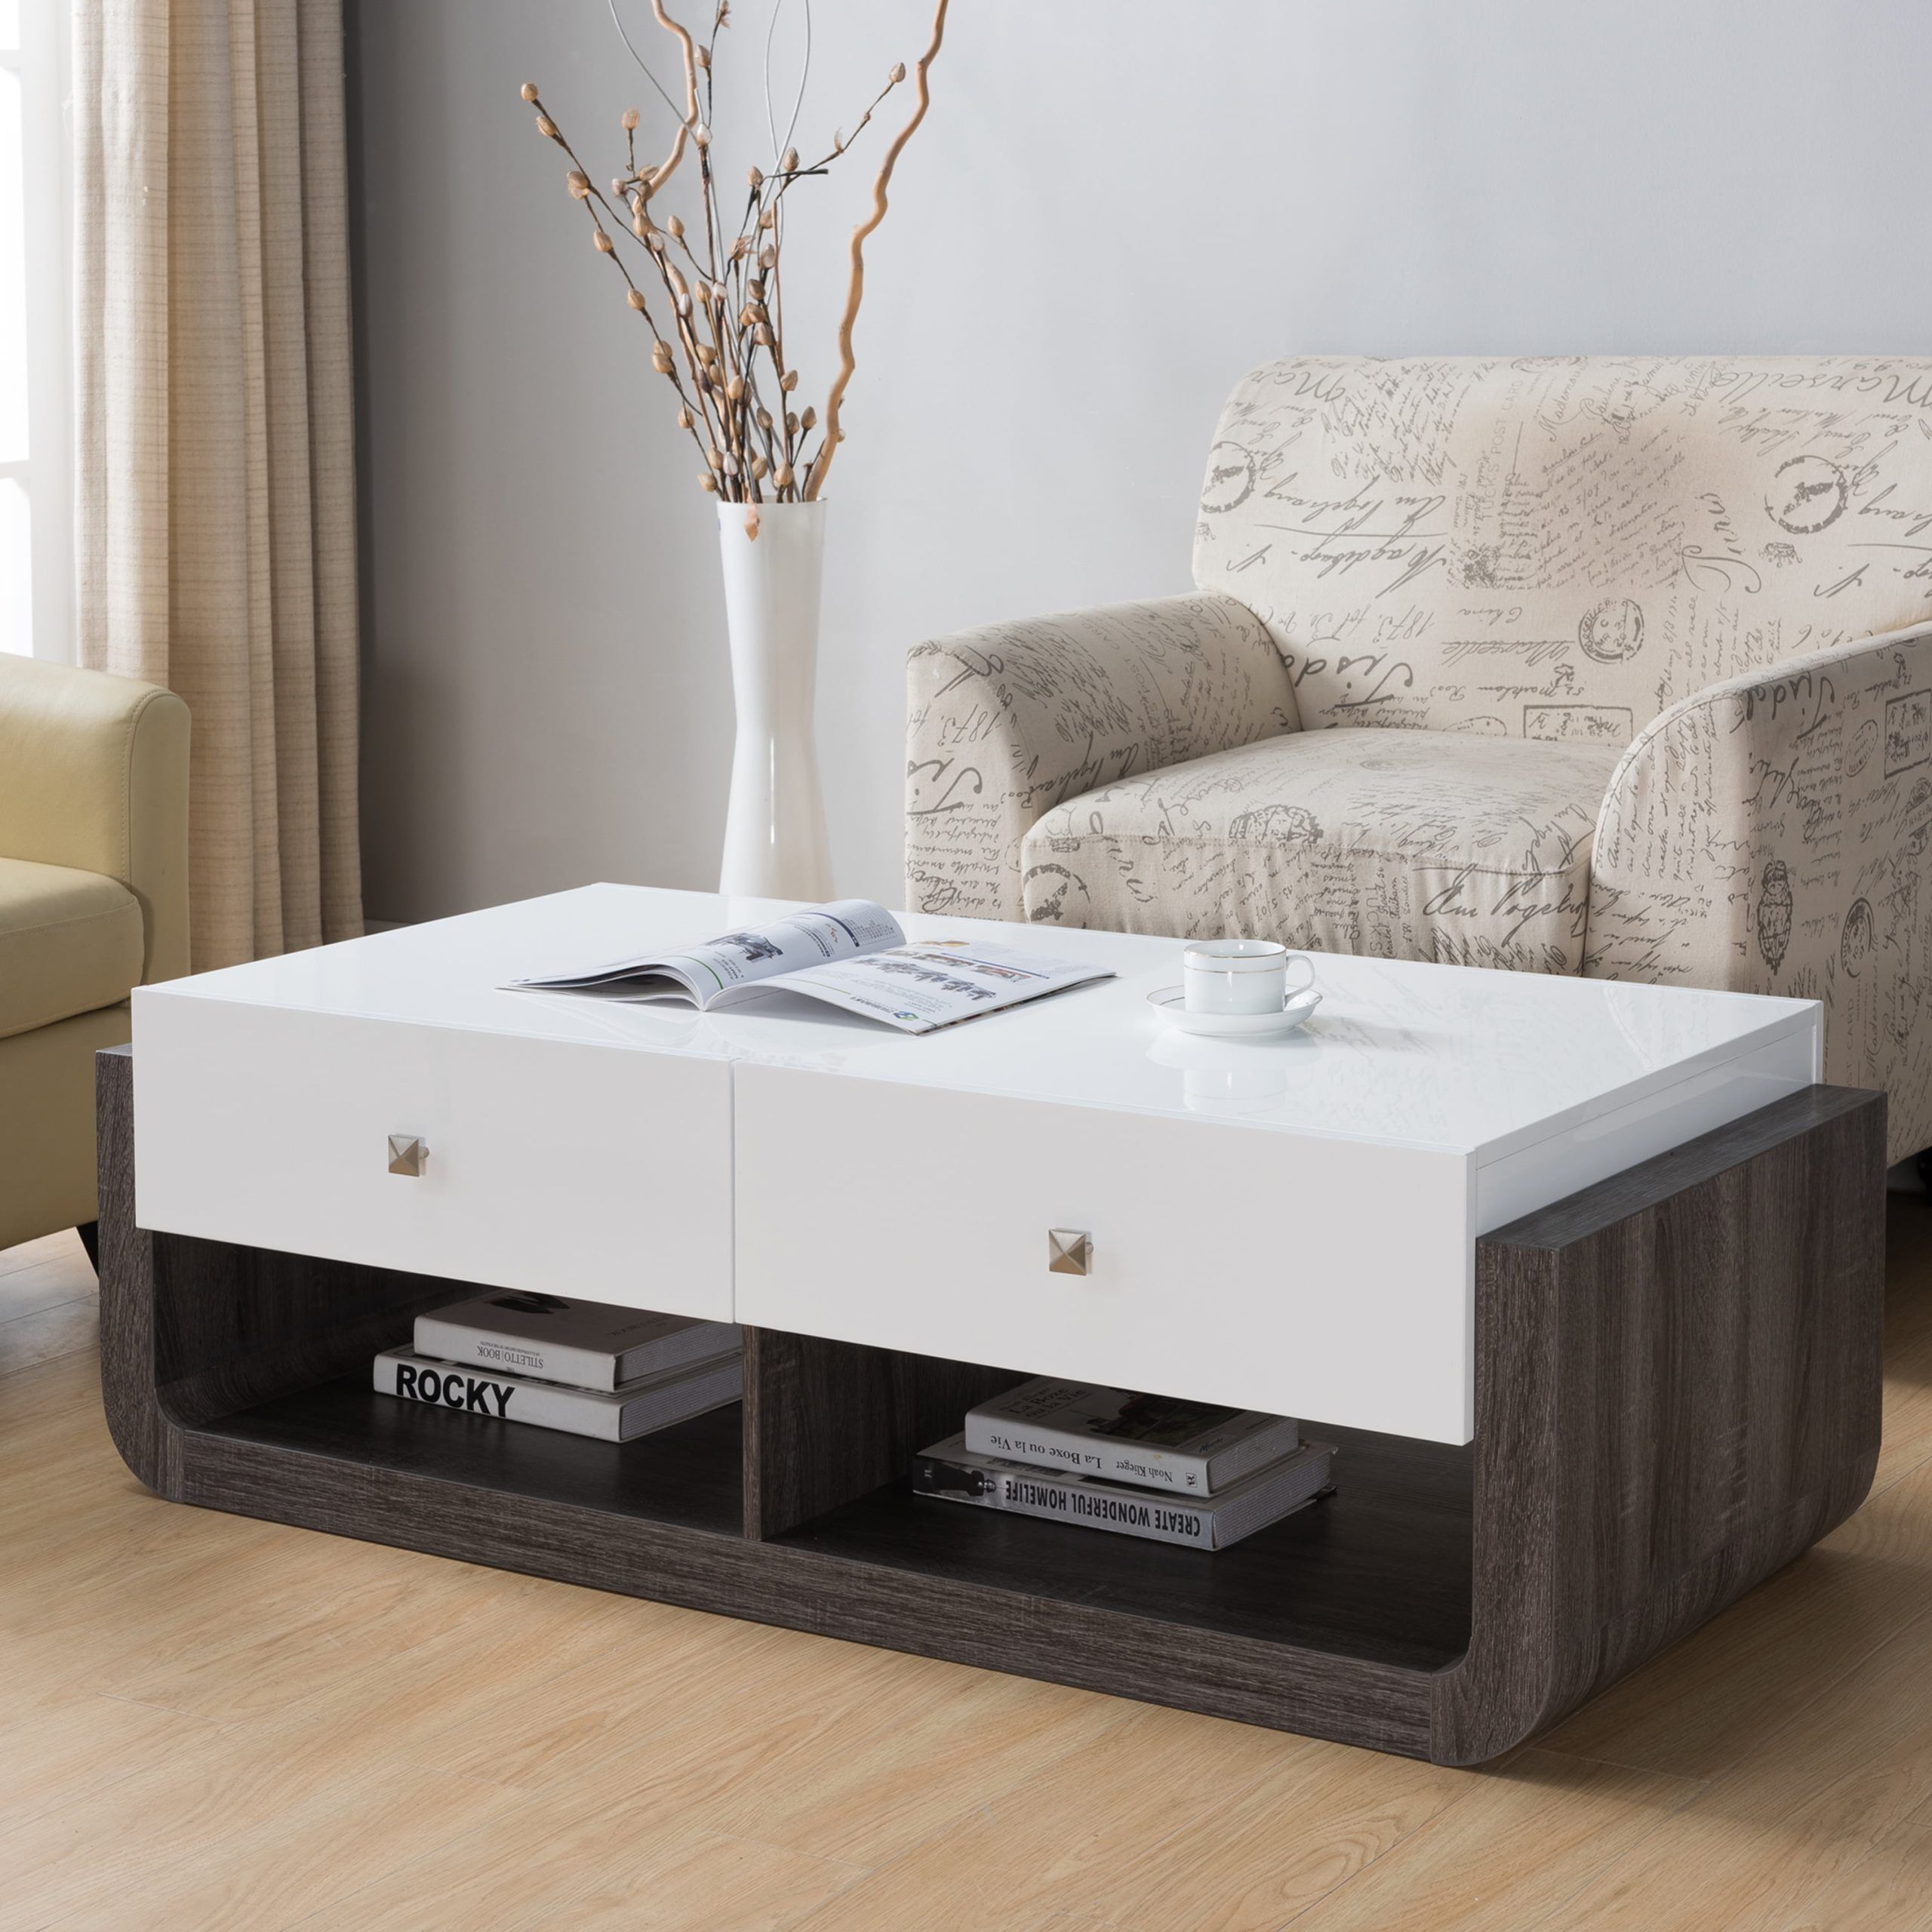 Furniture Of America Bealina Contemporary Multi Storage Coffee Table Intended For Coffee Tables With Storage (View 4 of 15)